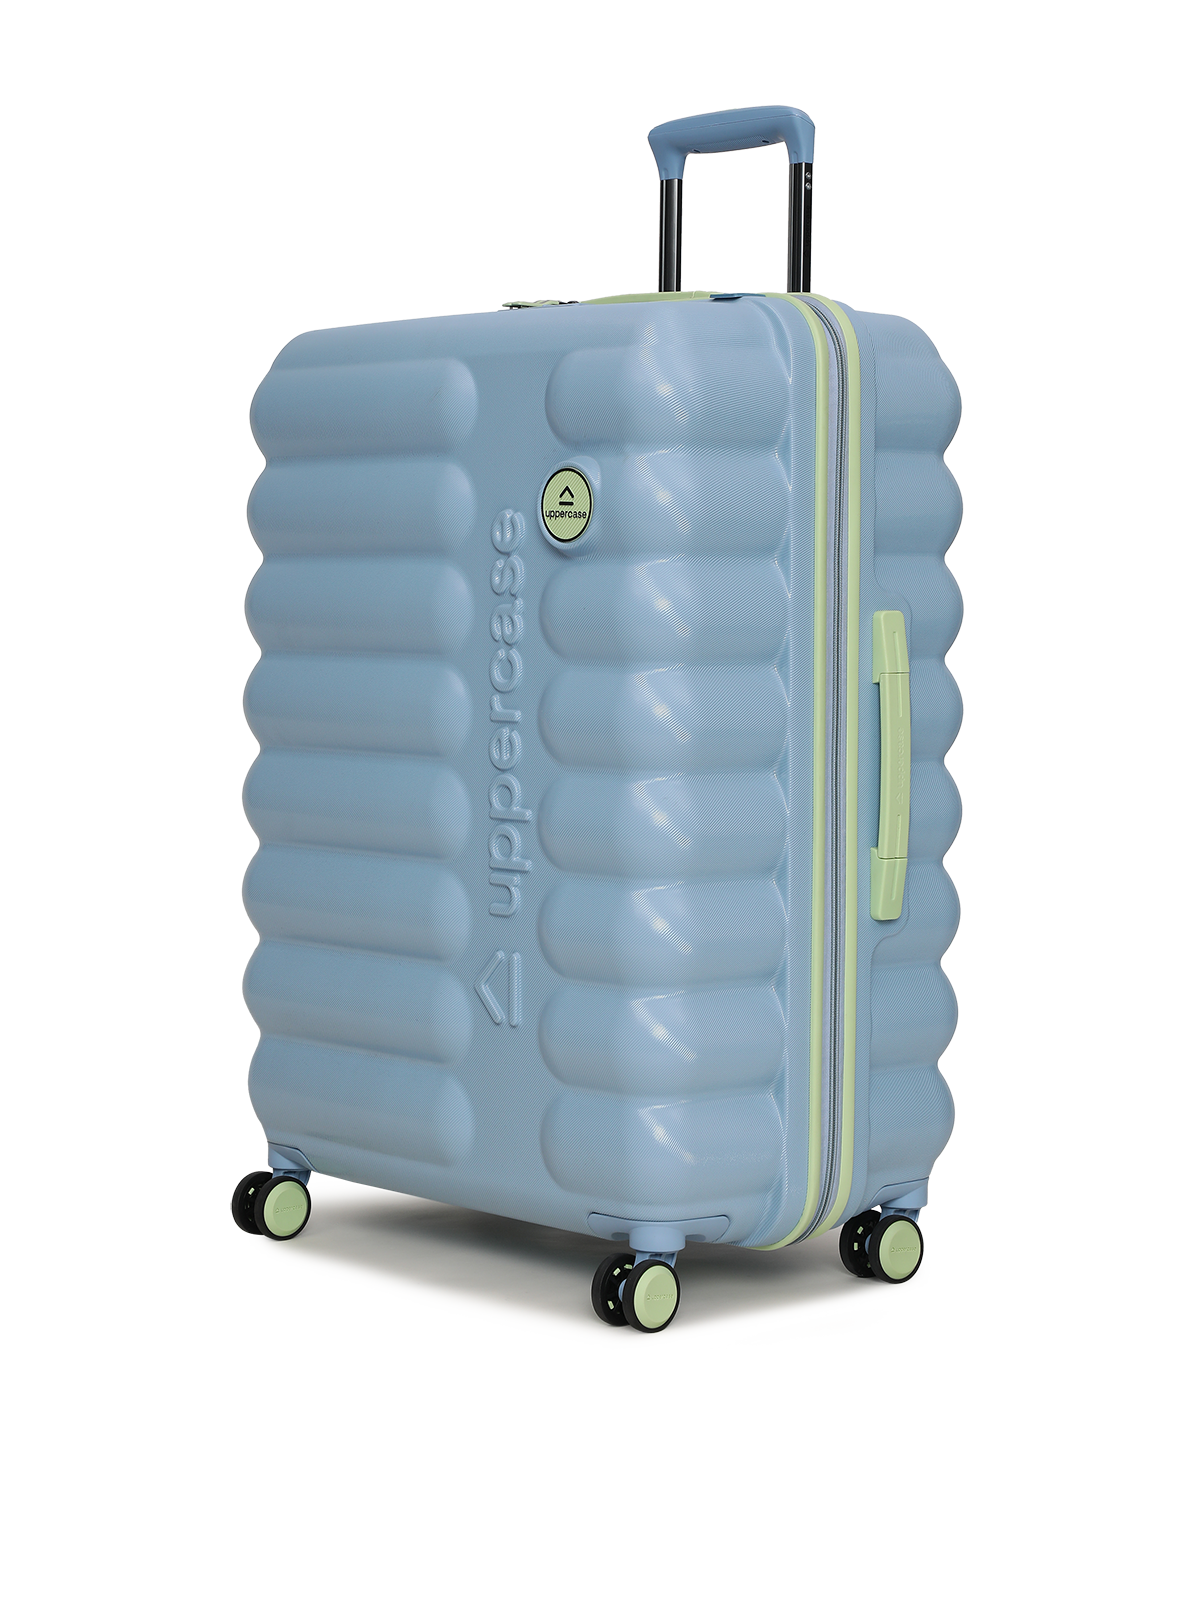 uppercase Astro 74cm (Large) | Check-in Trolley Bag | Sustainable Hardsided Luggage | Dual Wheel Suitcase | Flushed TSA Lock & Anti-Theft Zippers | Suitcase for Men & Women | 2000 Days Warranty (Powder Blue)